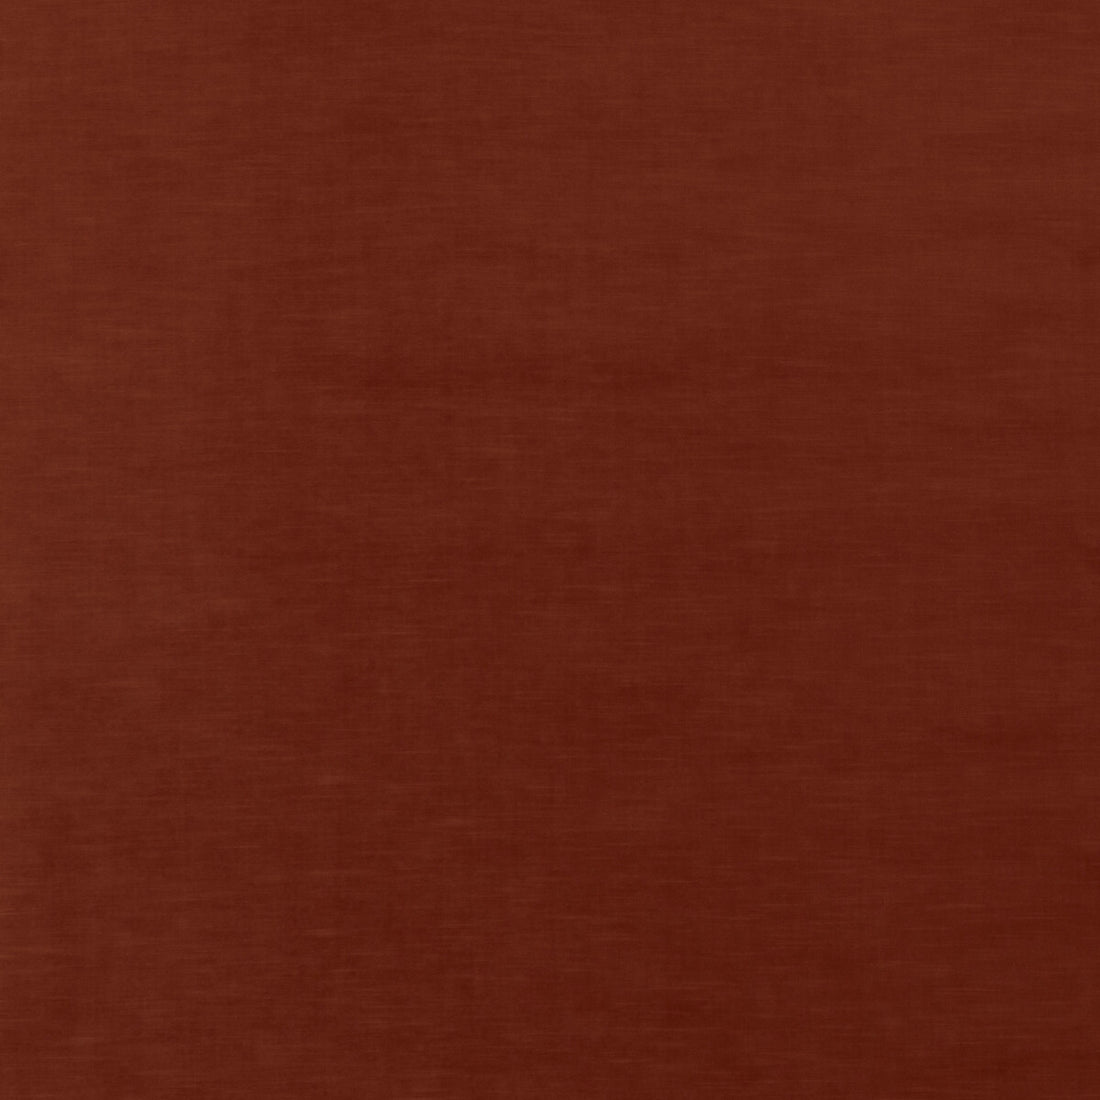 Quintessential Velvet fabric in sienna color - pattern ED85359.338.0 - by Threads in the Quintessential Velvet collection